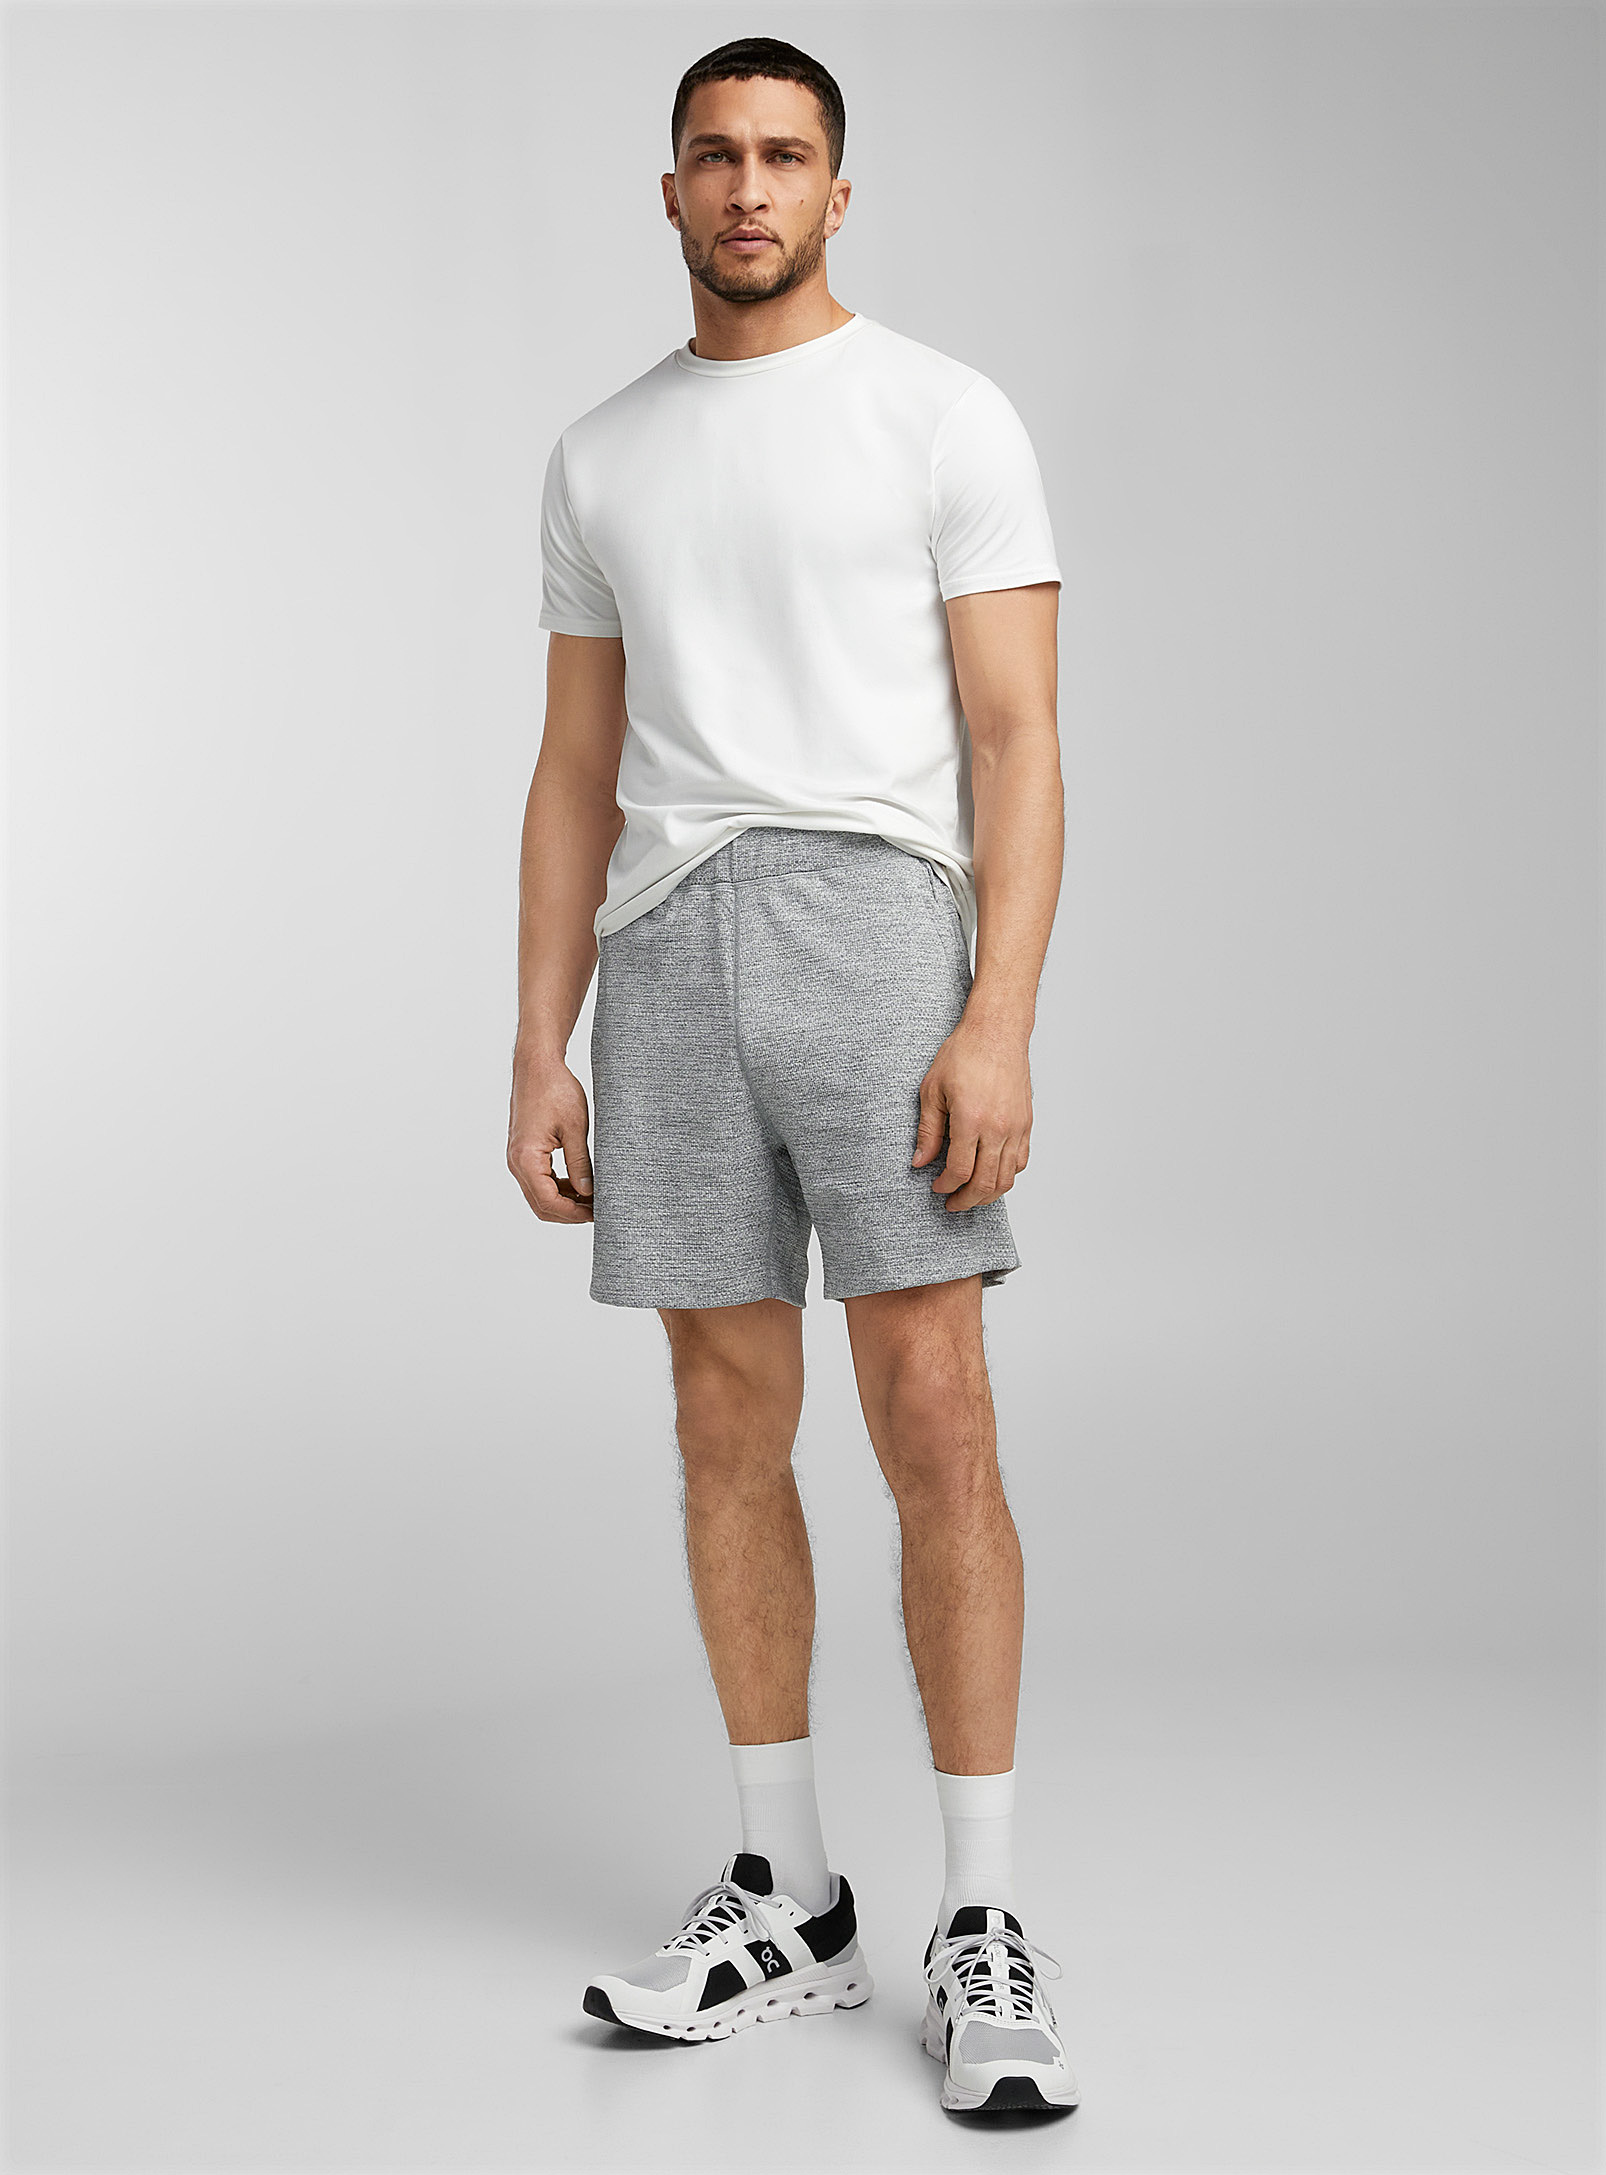 Reigning Champ - Le short jersey respirant Solotex